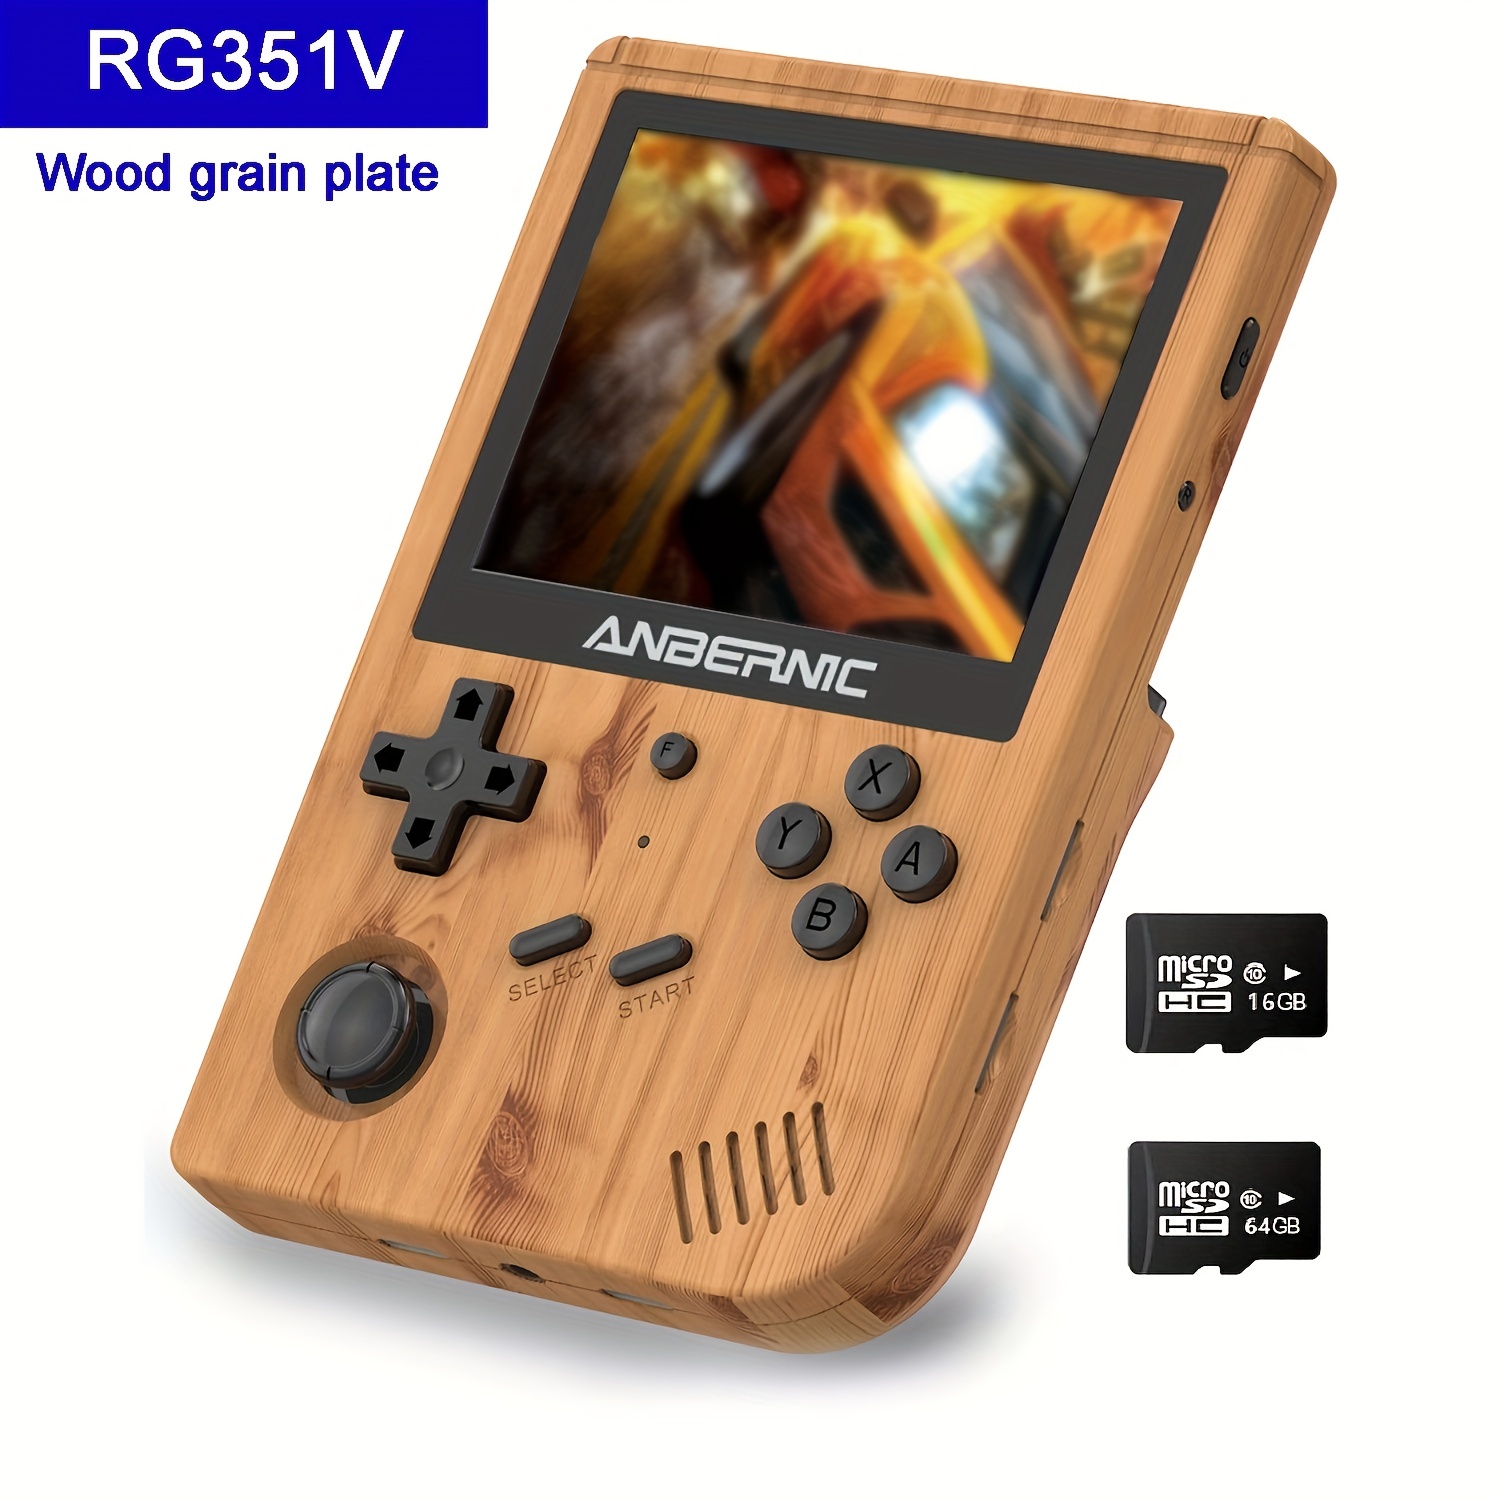 Buy the Best RG351V Wood Grain Version Handheld Console - WiFi, TF Card & 3.5 Inch IPS Screen